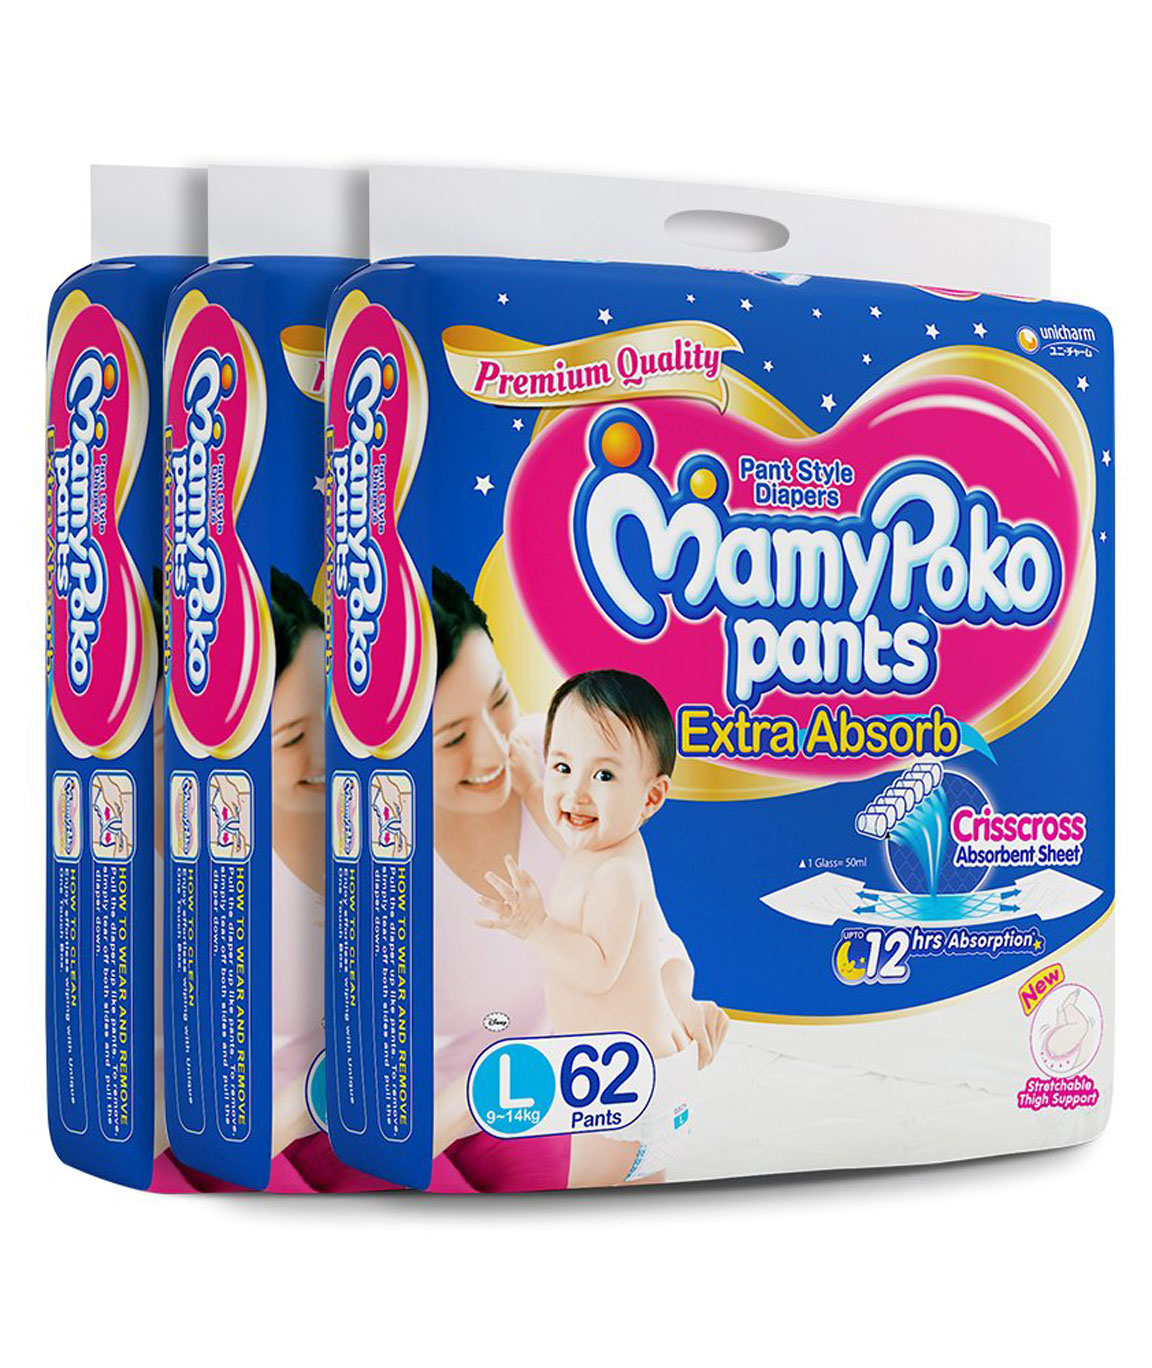 Buy MAMYPOKO PANTS EXTRA ABSORB DIAPERS (LARGE) - 74 DIAPERS Online & Get  Upto 60% OFF at PharmEasy